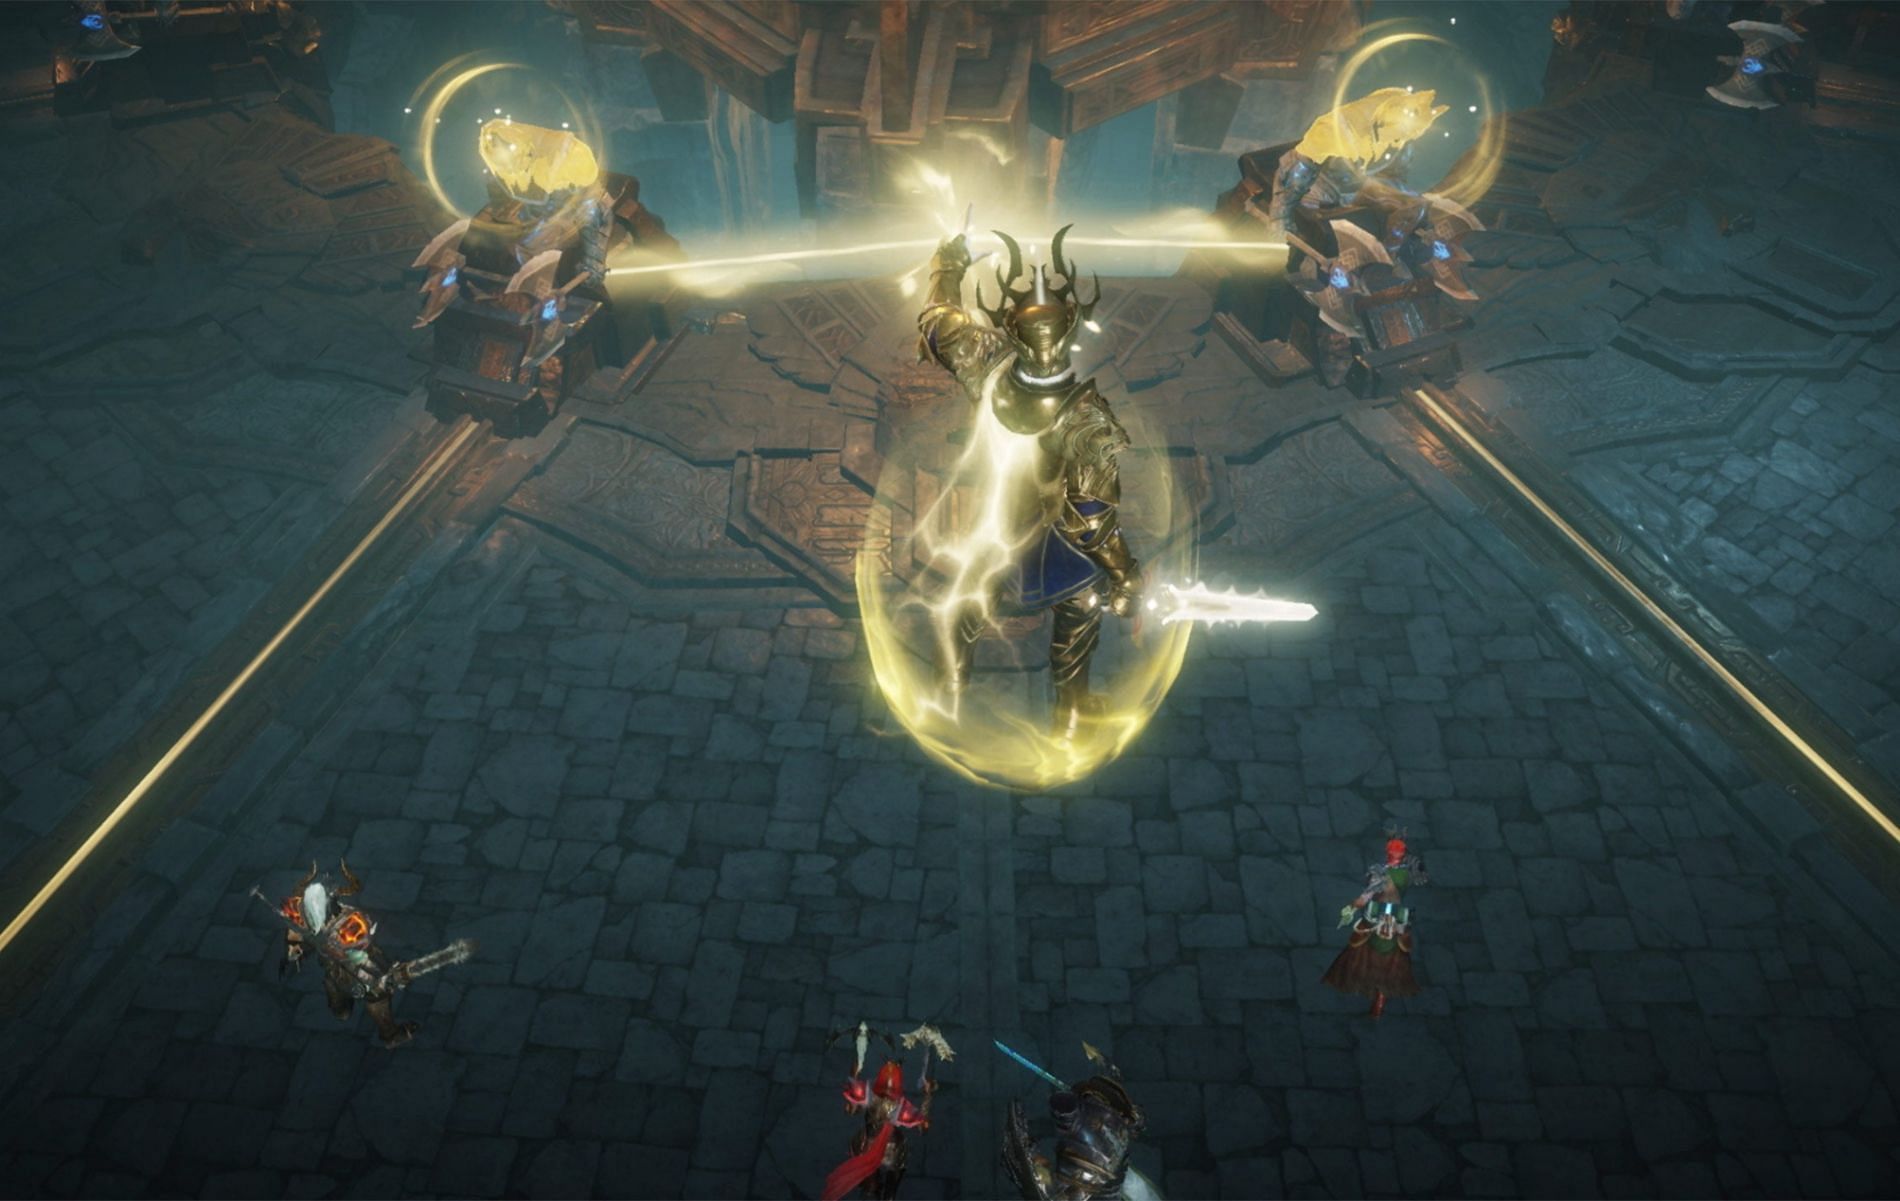 A new battle pass and playable content are things to expect from Season 2 (Image via Diablo Immortal)